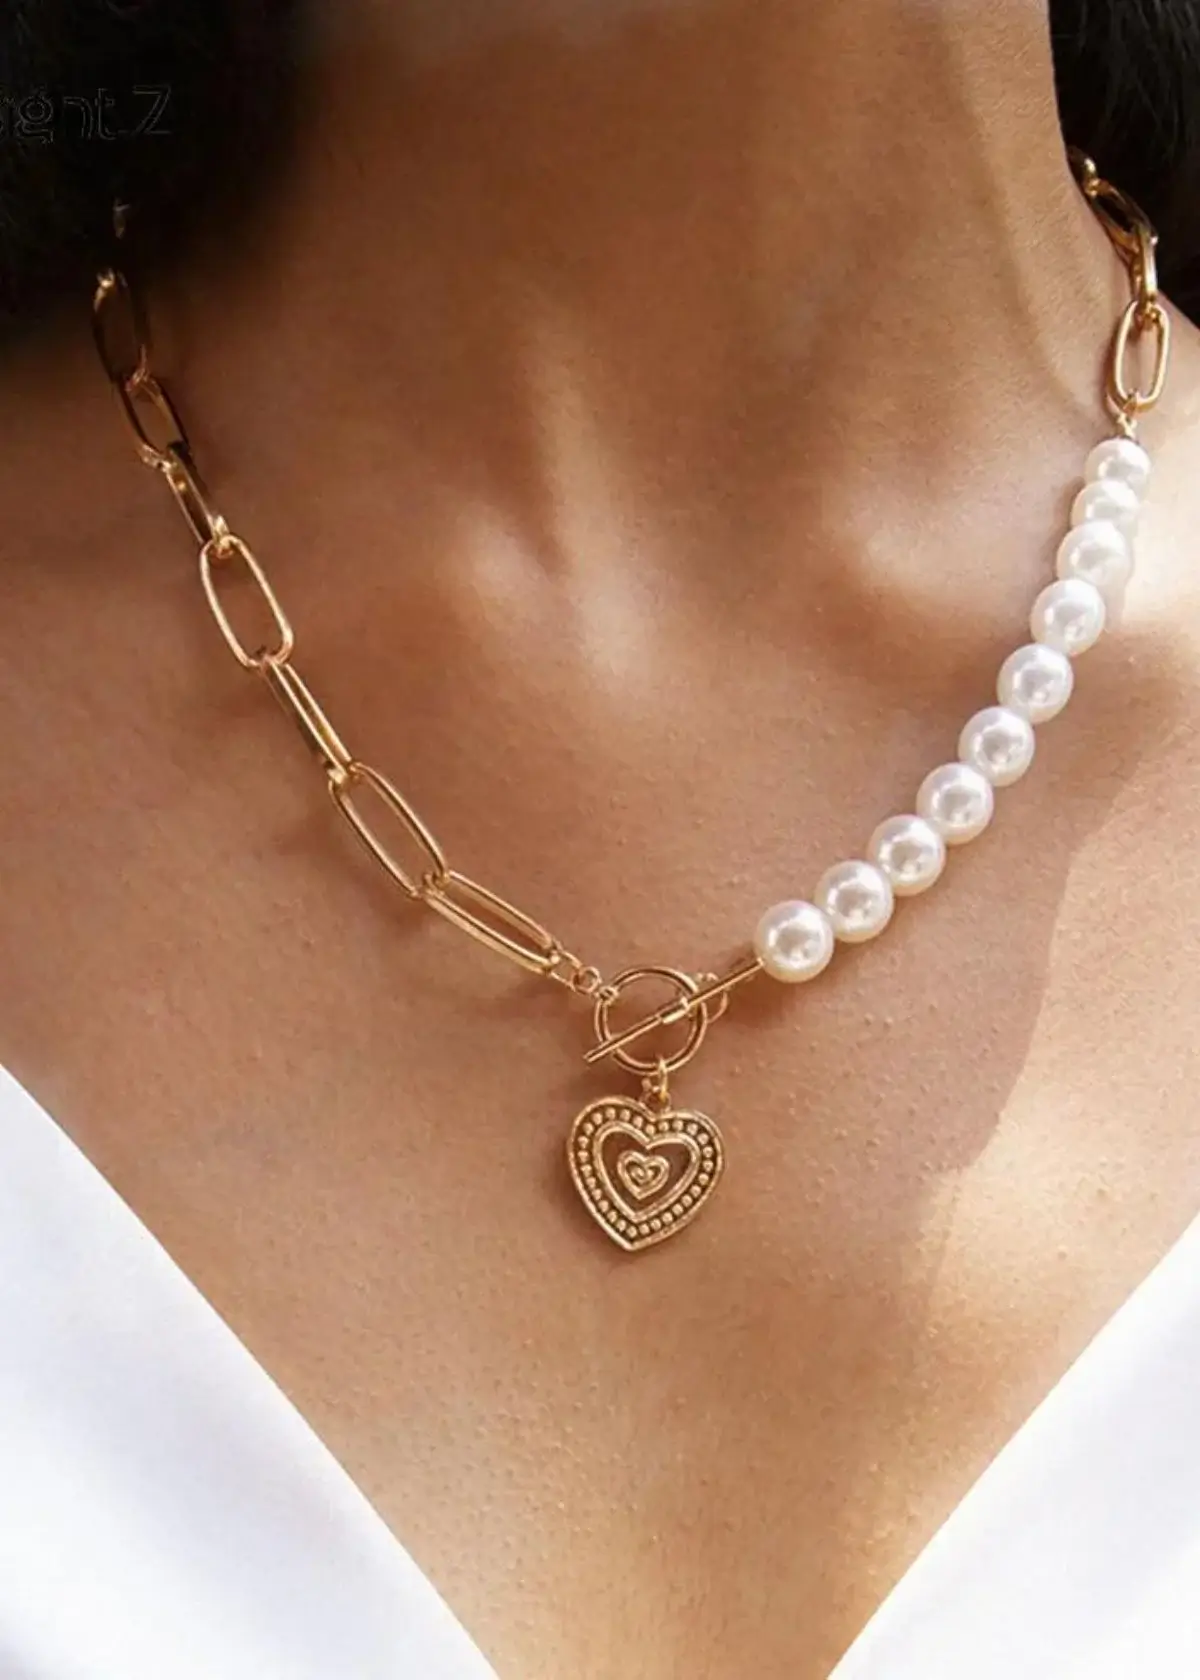 How is a Half-pearl Half-chain Necklace made?